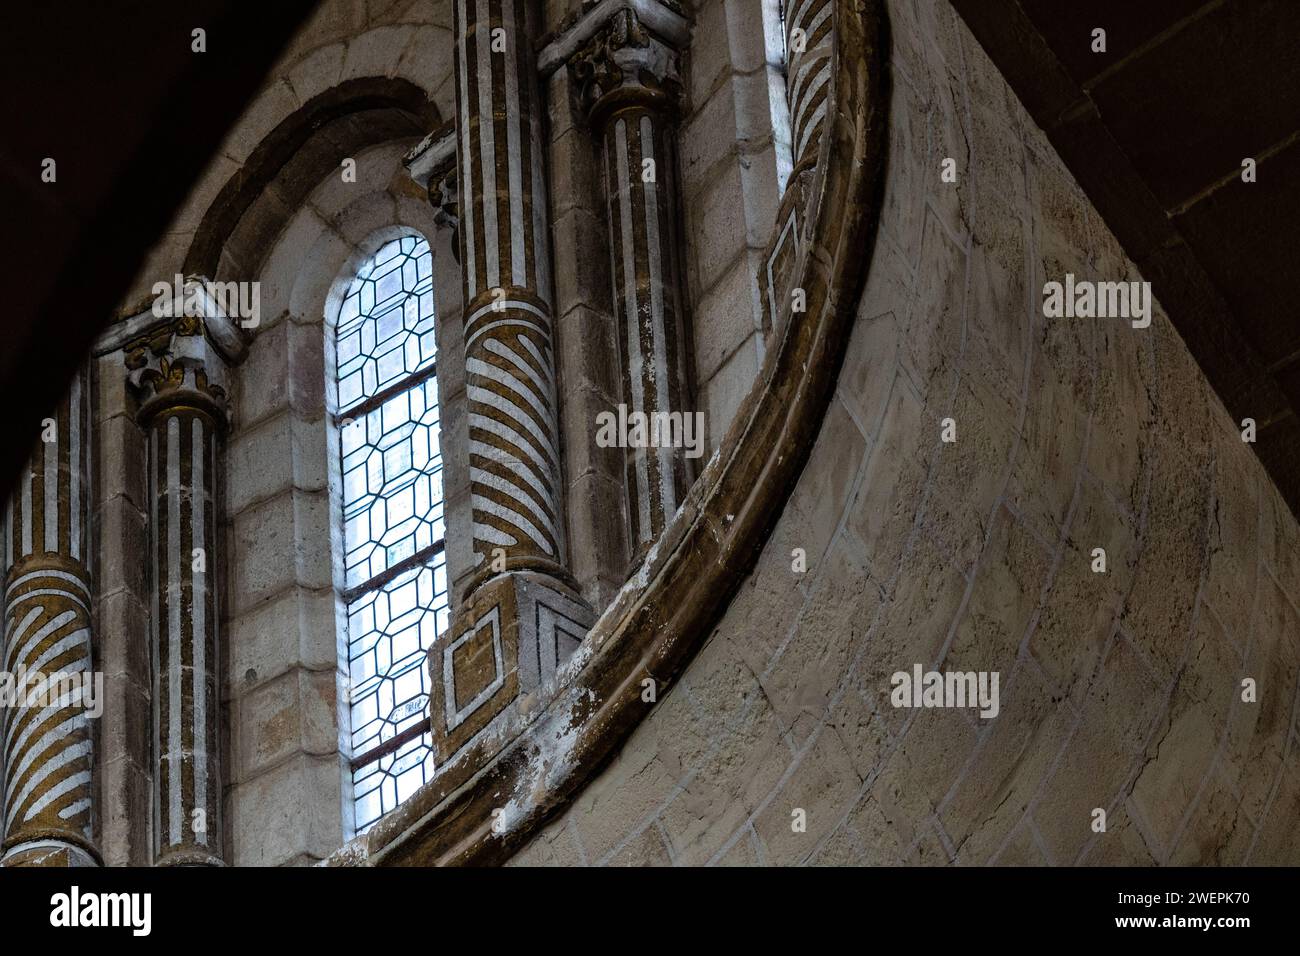 Zamora, Spain - April 7, 2023: Interior view of the dome of the romanesque Cathedral of Zamora. Telephoto lens Stock Photo